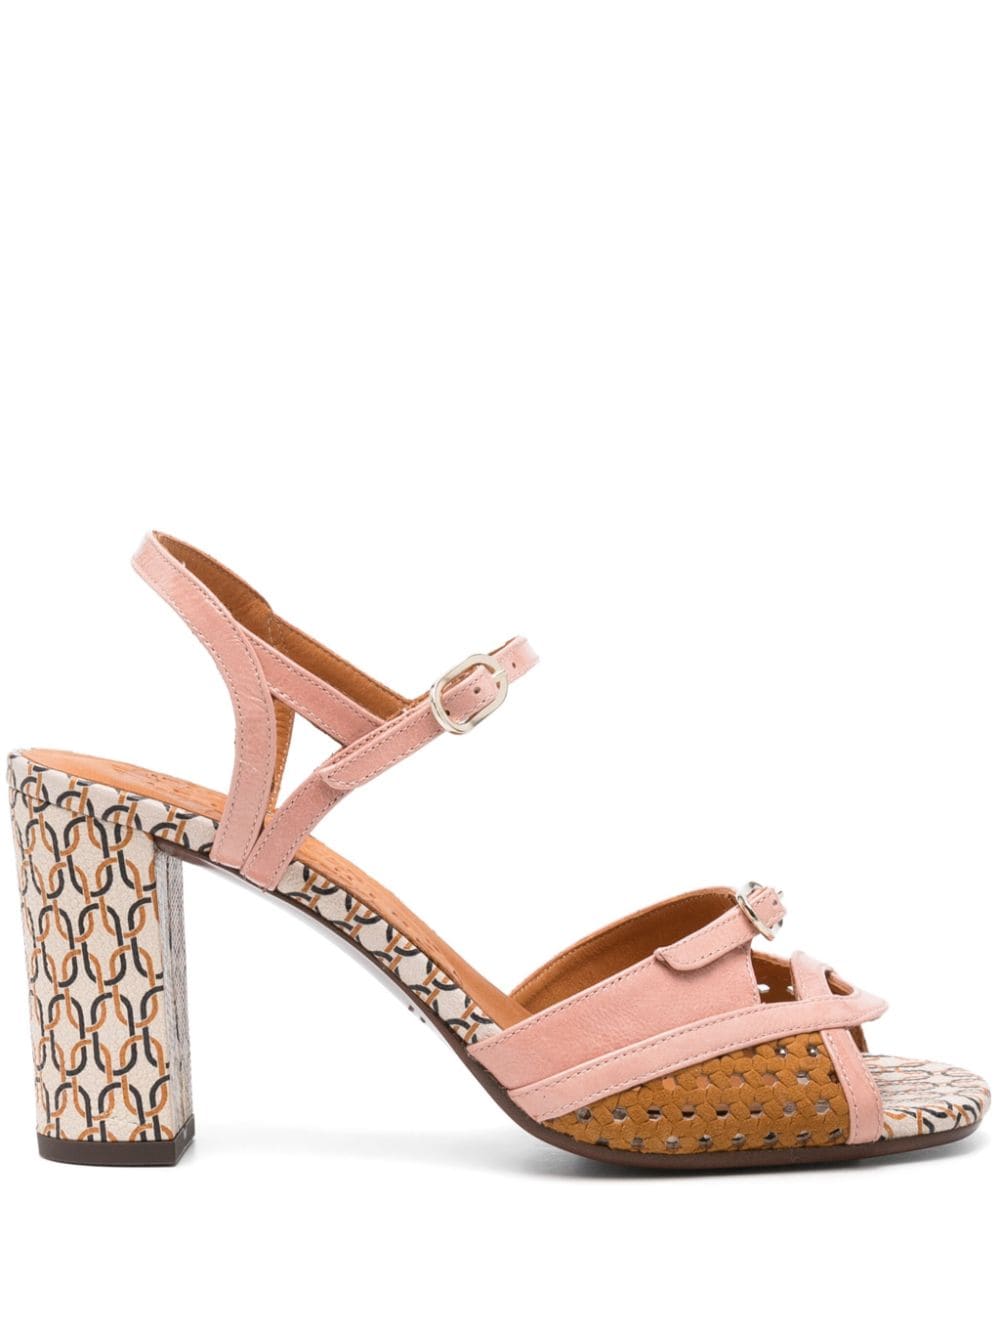 Chie Mihara Bindi 75mm Leather Sandals In Pink